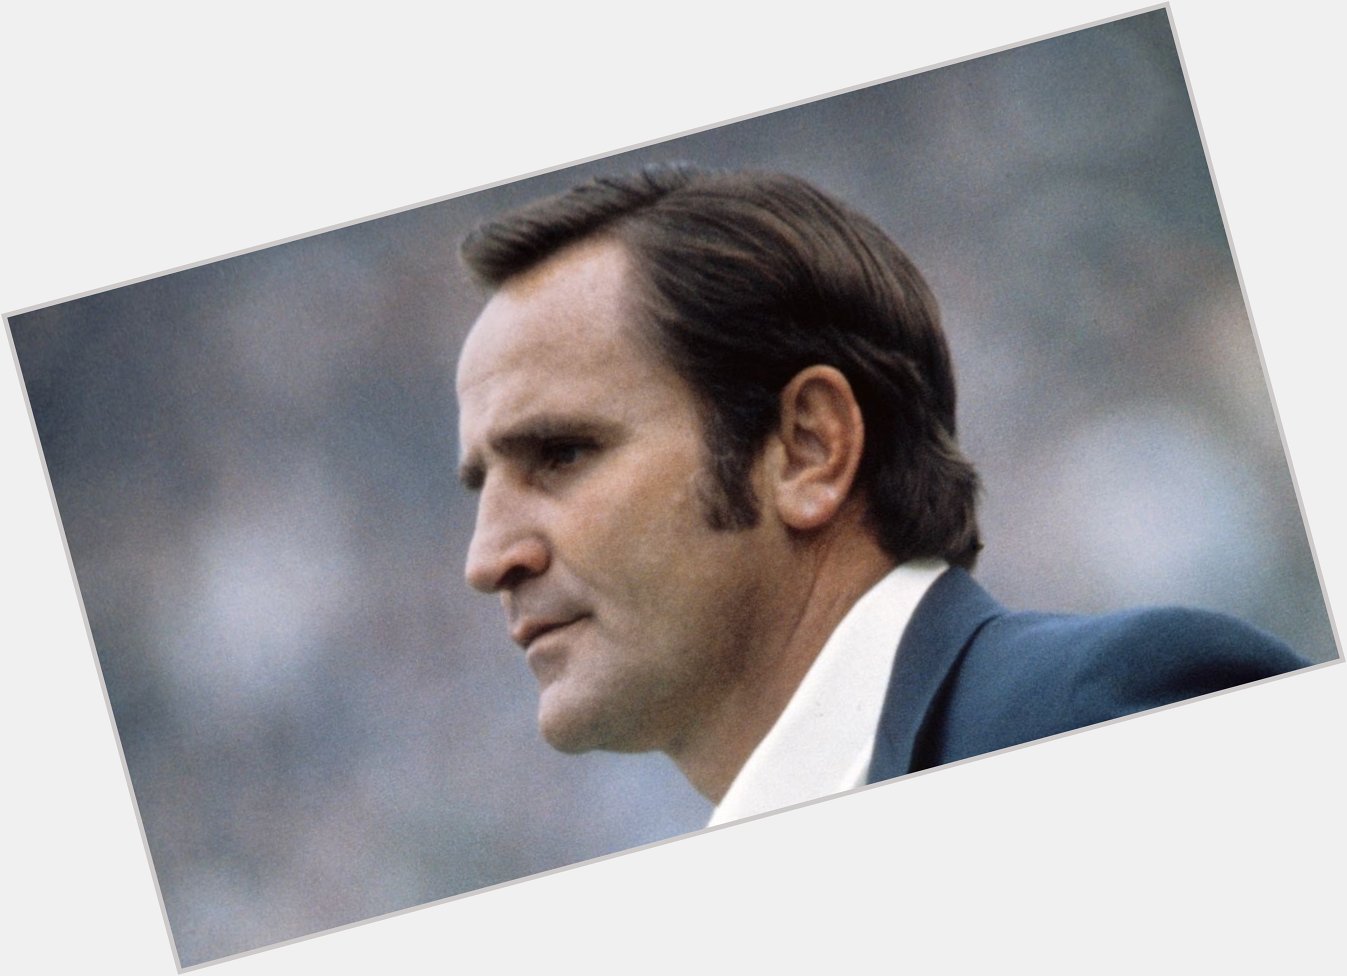 Happy Birthday to the sports figure in the history of South Florida - Coach Don Shula.  